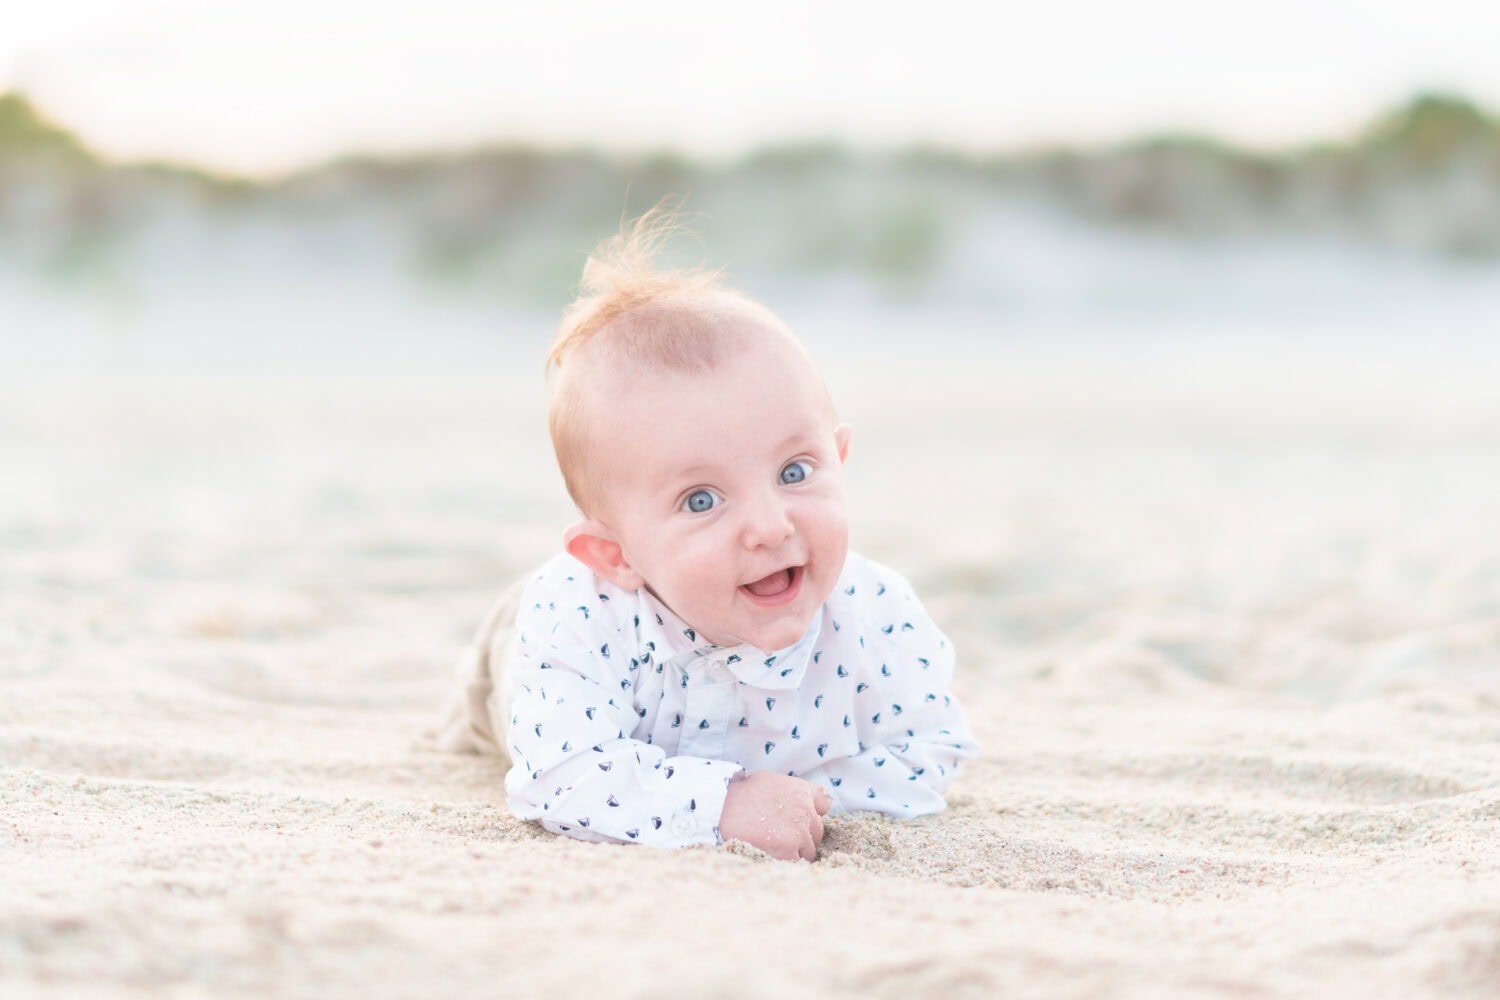 5 Month old laying in the sand with a big smile - Huntington Beach State Park